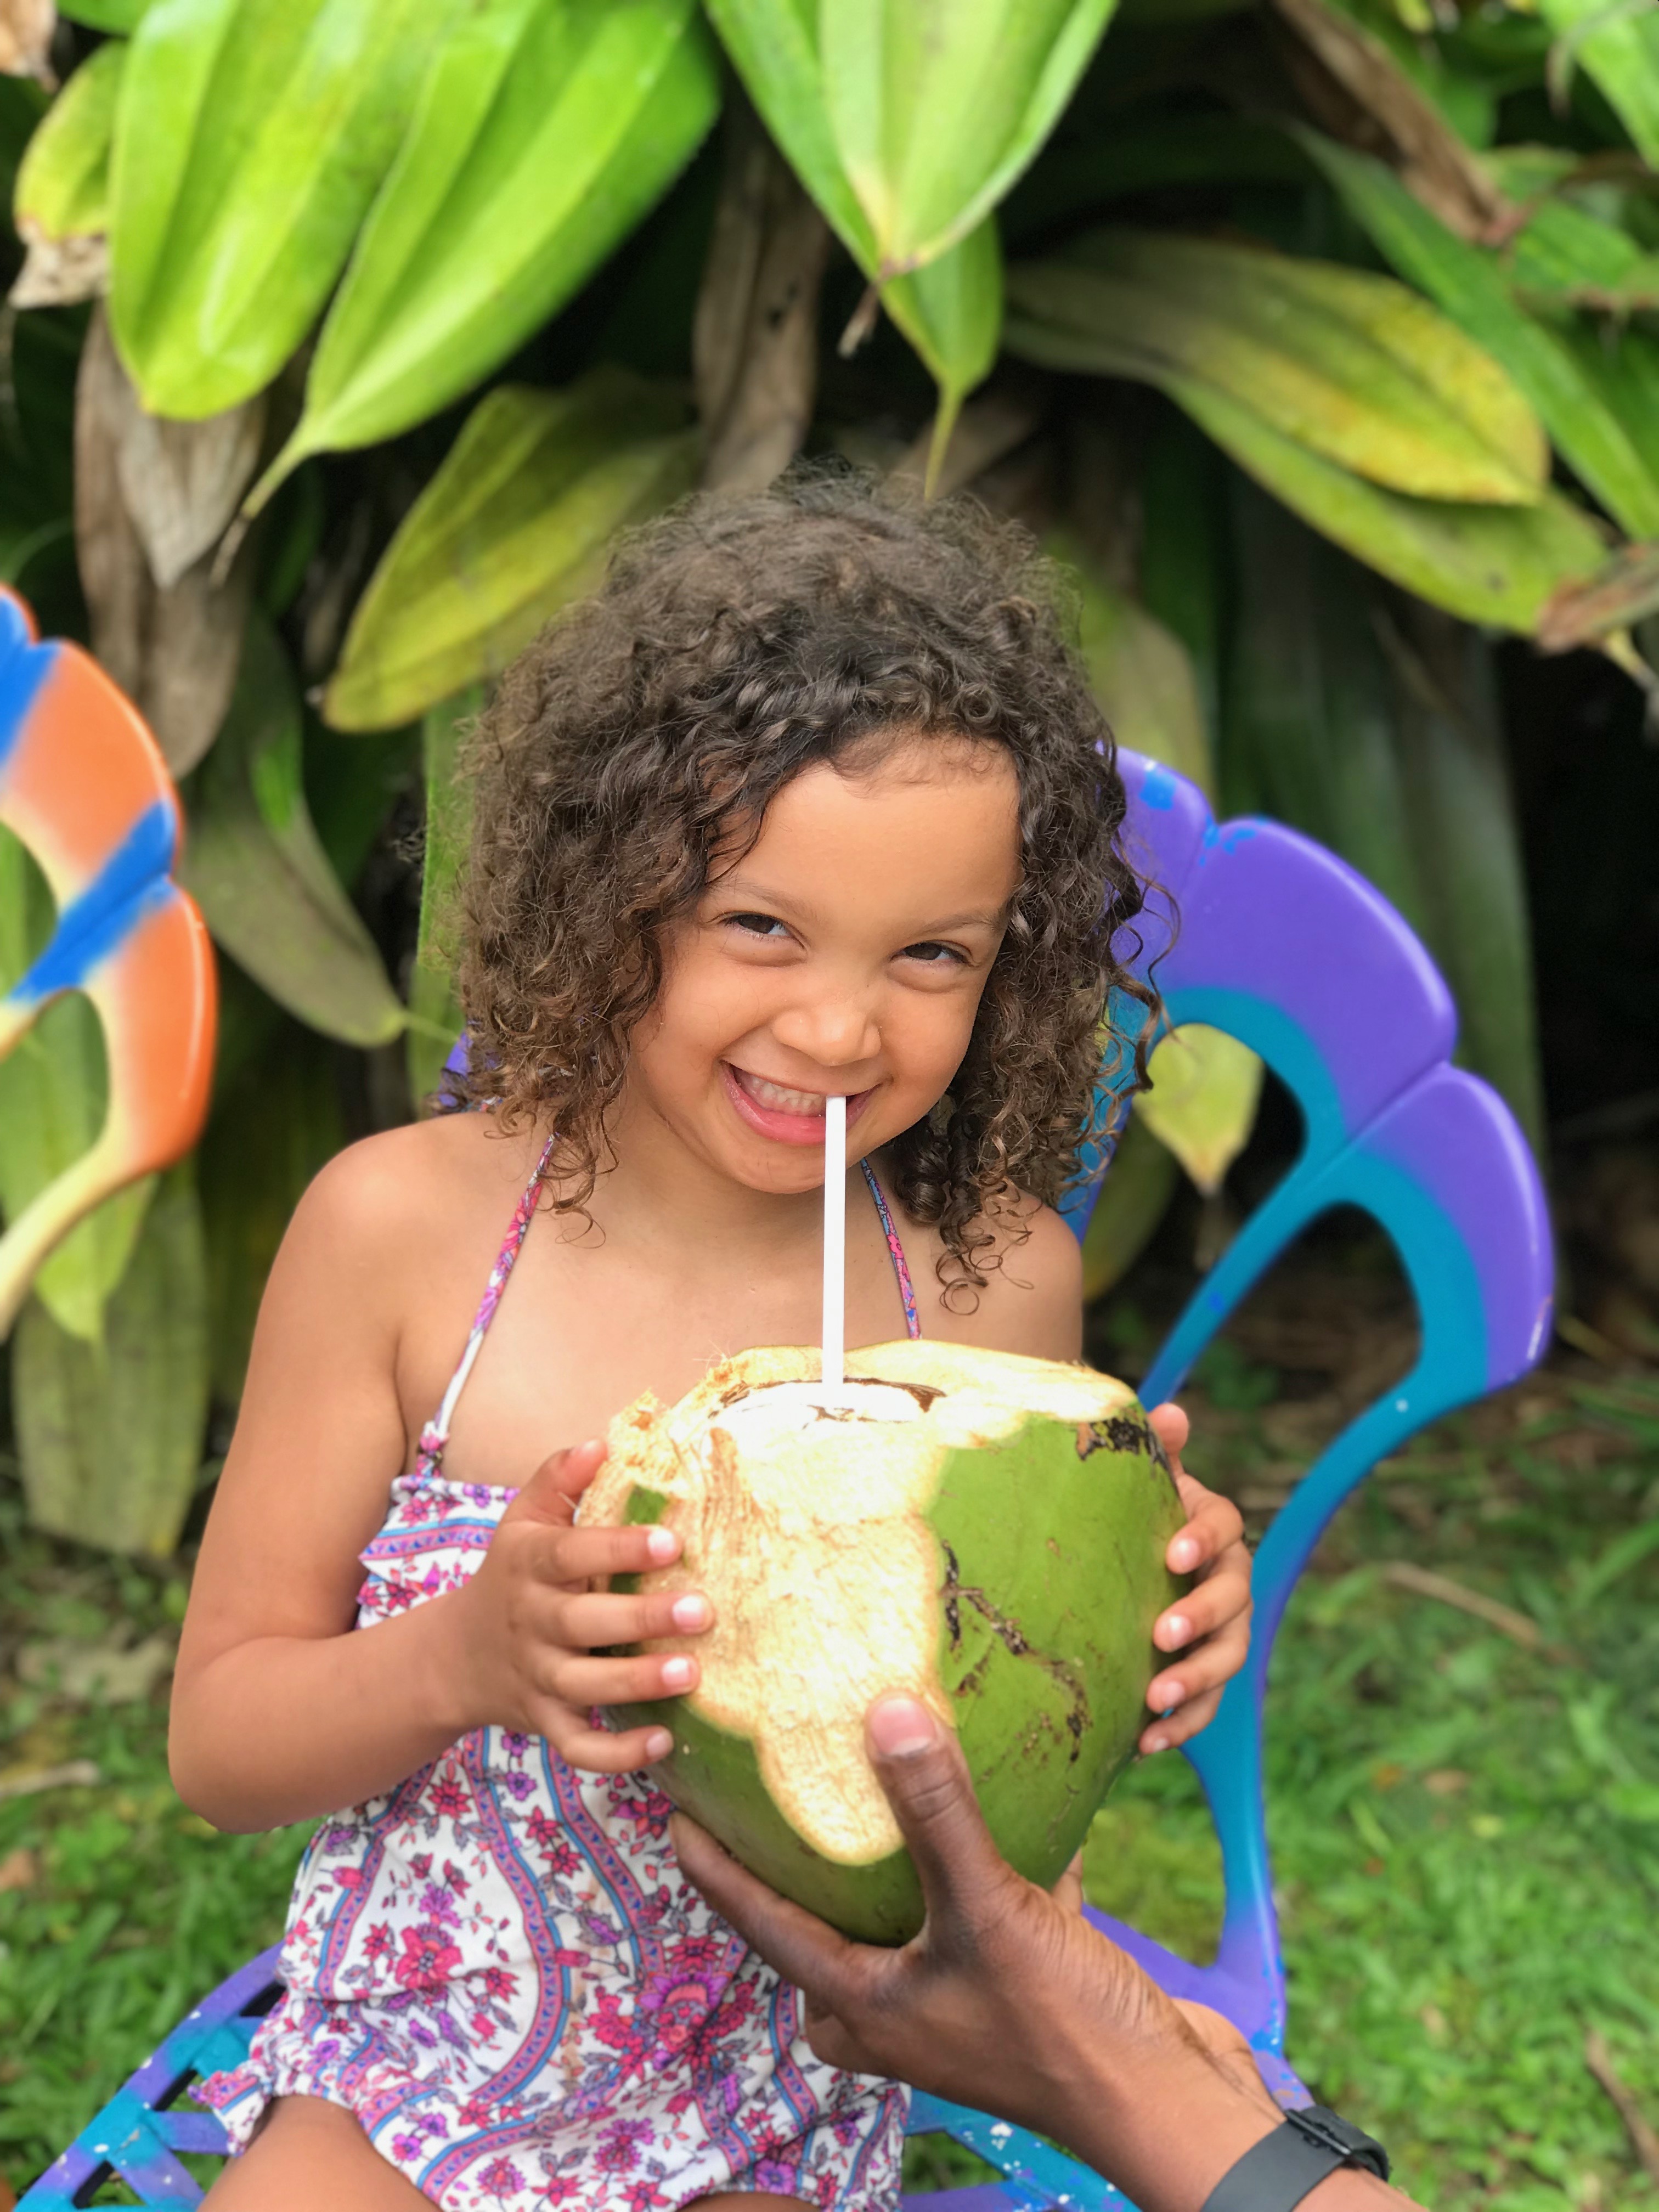 Our Two Favorite Hawaii Desserts – Shave Ice and Hula Pie